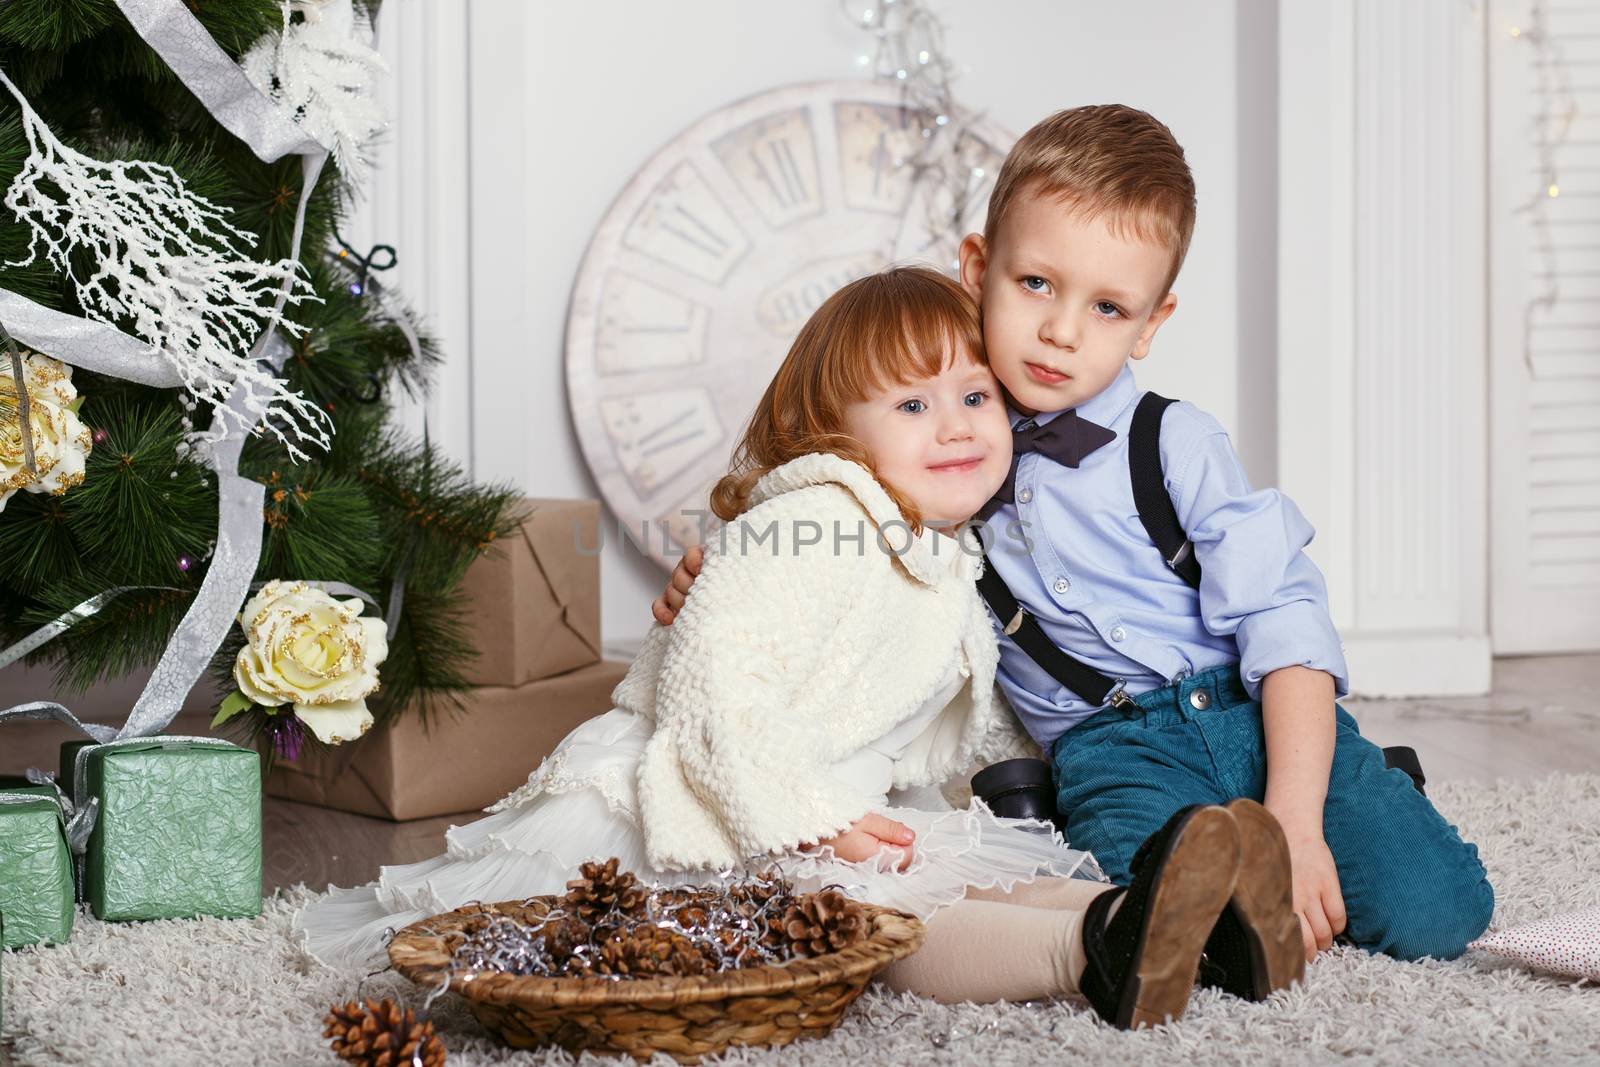 Portrait of a happy children - boy and girl. Little kids in Christmas decorations. Brother and sister hugging.